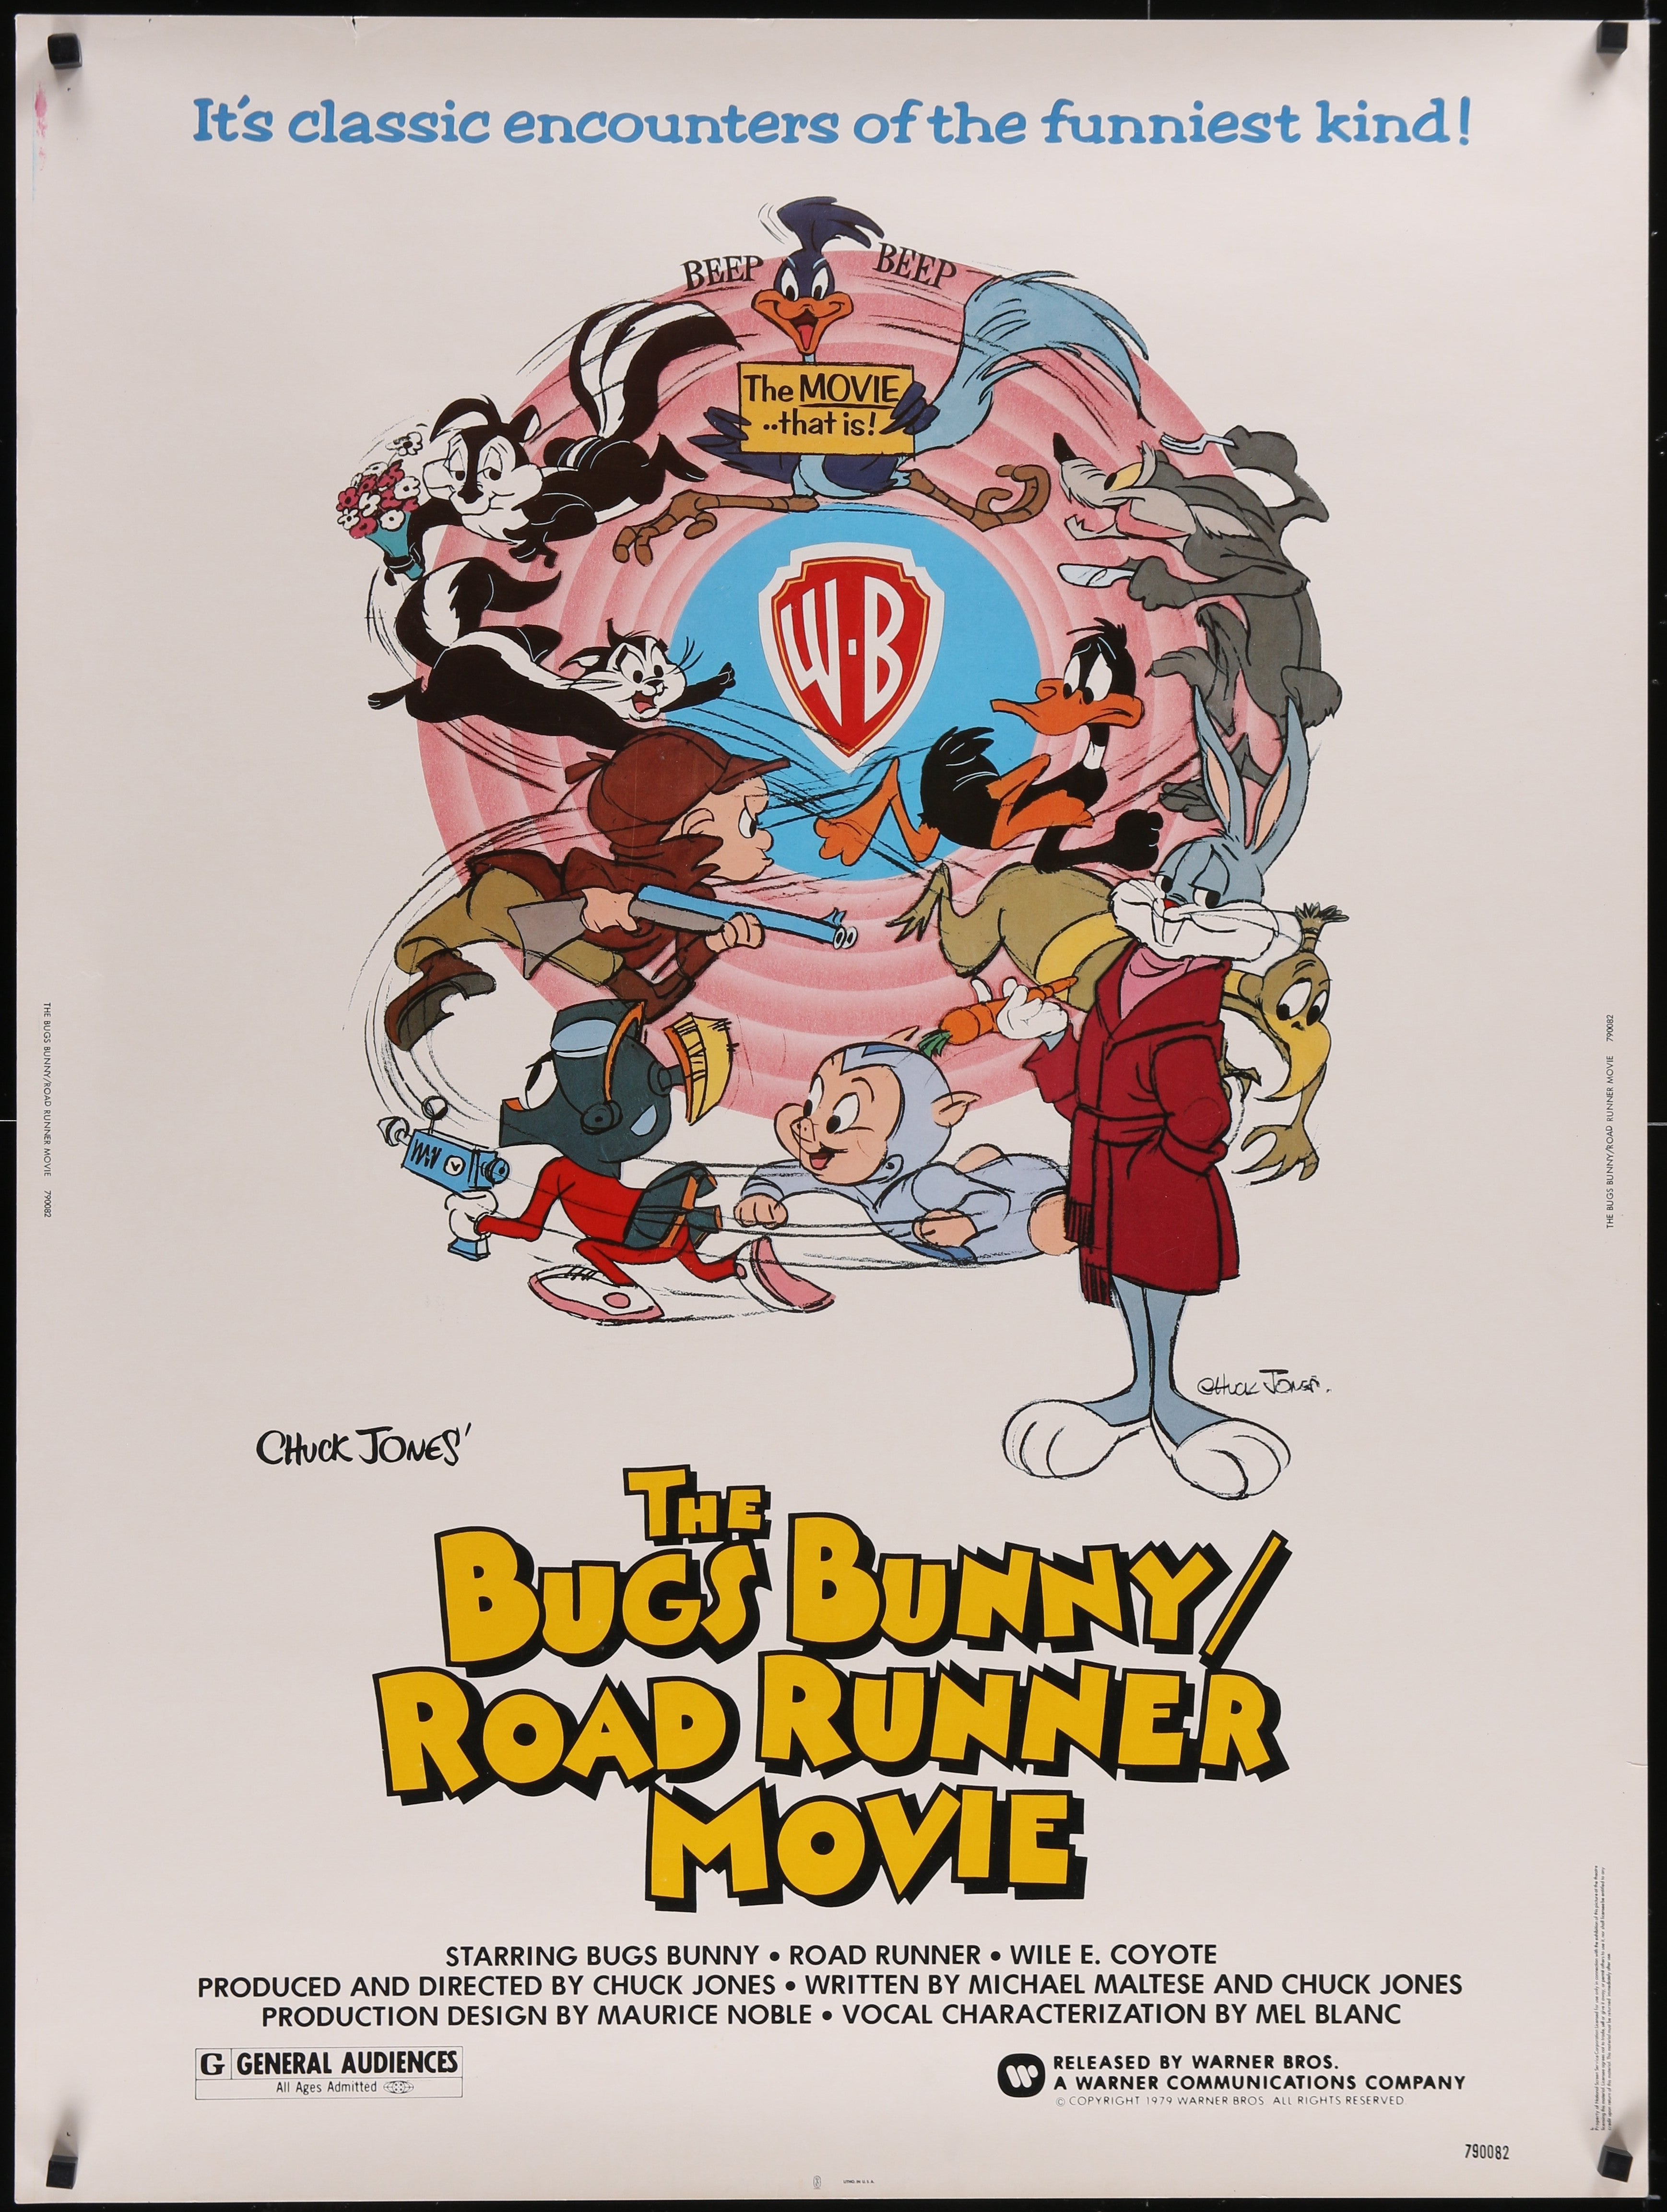 THE BUGS BUNNY/ROAD RUNNER MOVIE (1979)